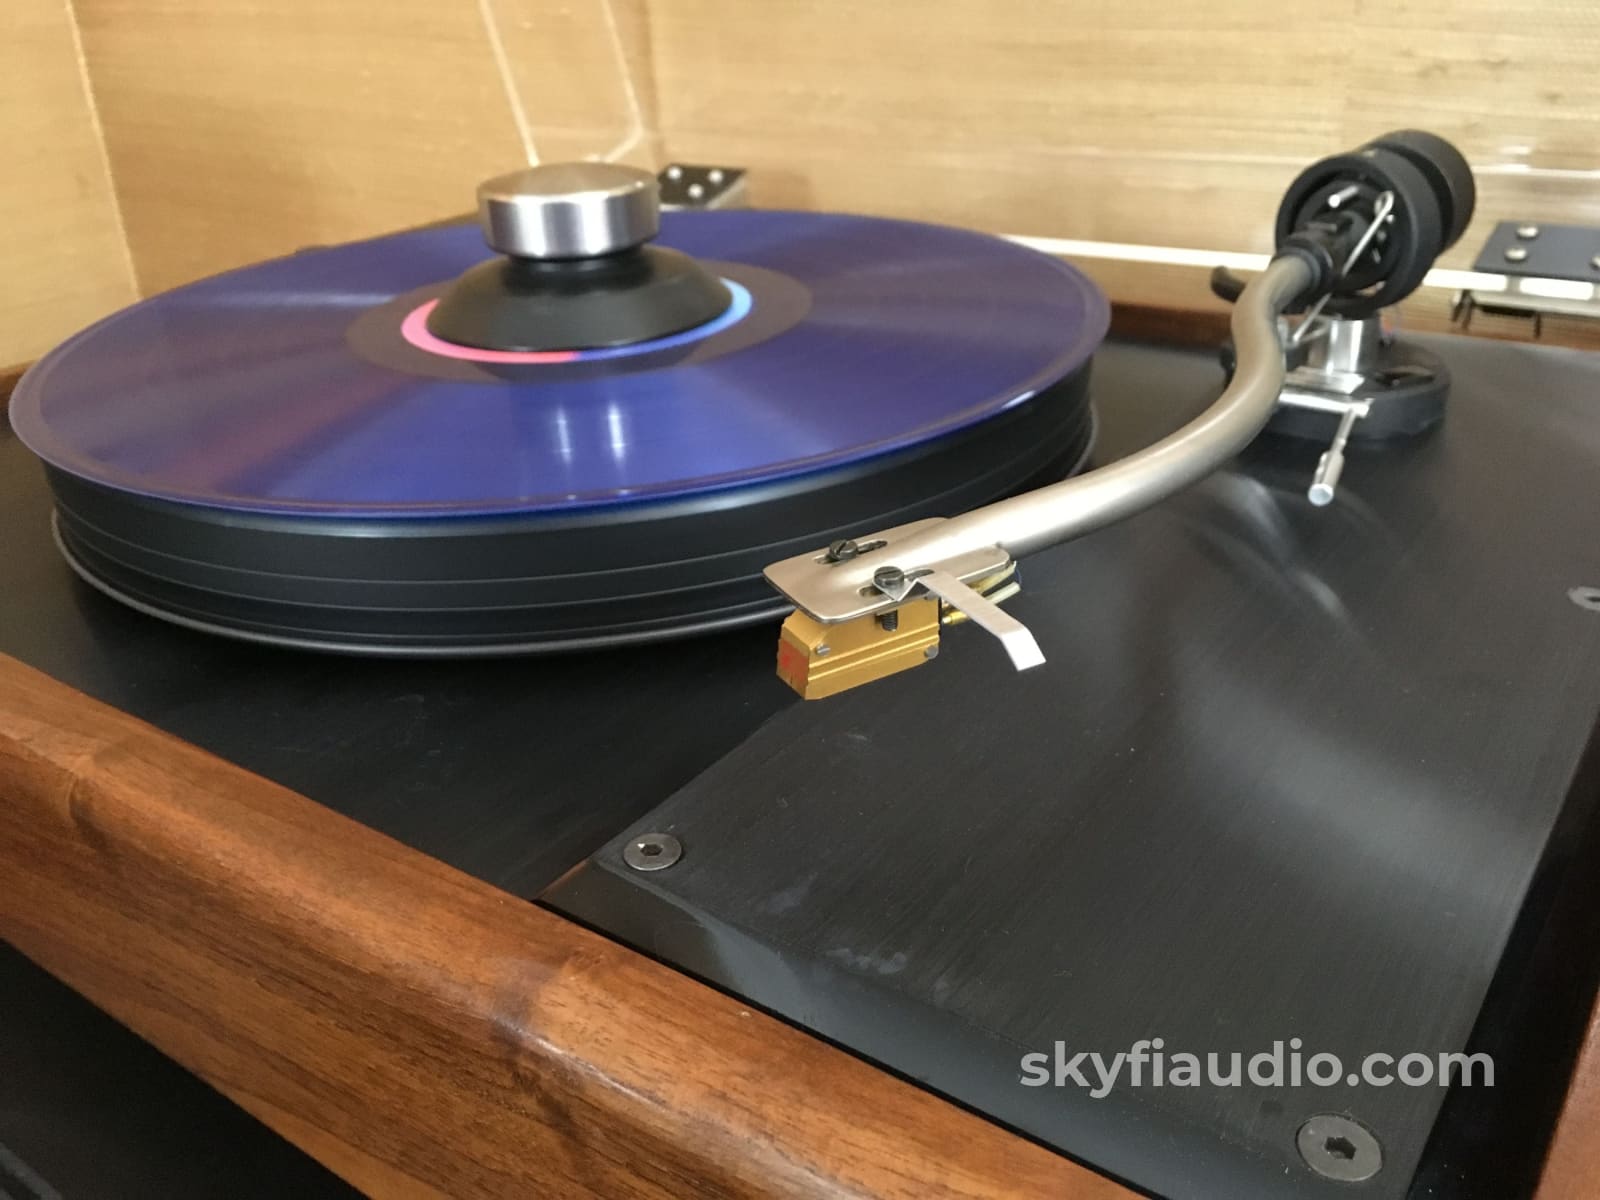 Vpi Industries Hw-19 Turntable With Upgrades And New Grado Cartridge